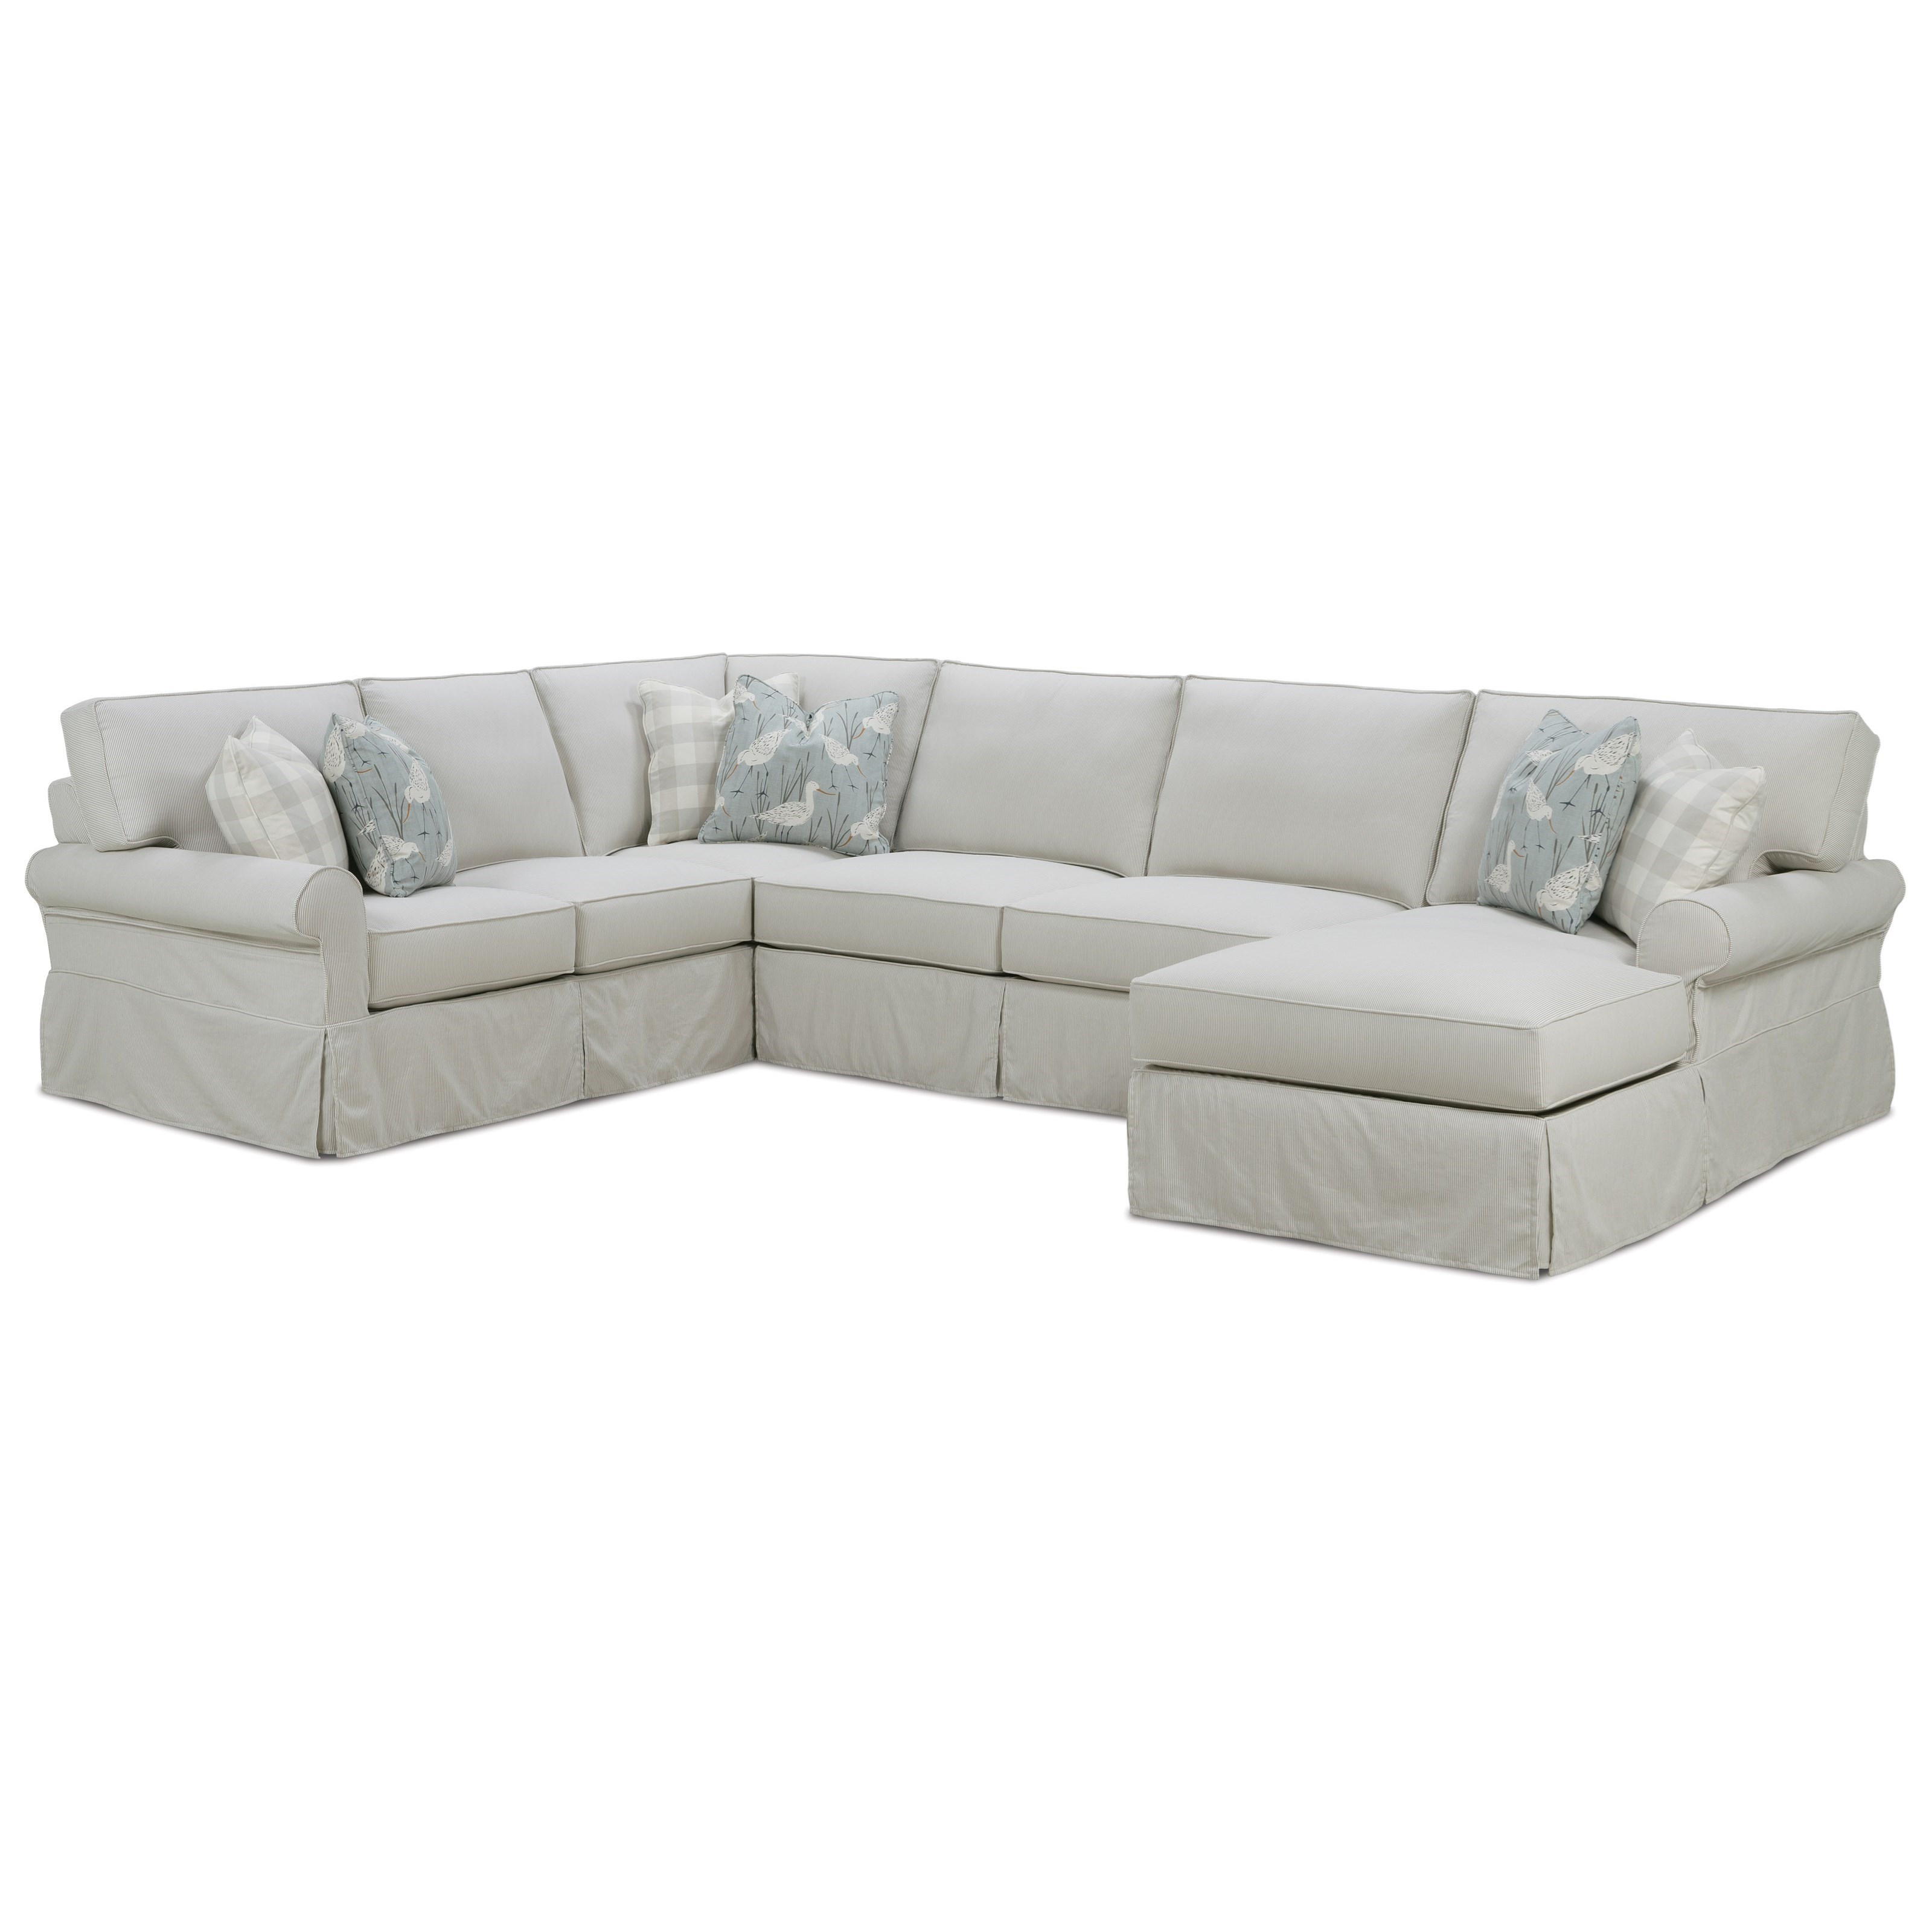 Rowe Easton Casual Sectional Sofa With Slipcover Baers in dimensions 3200 X 3200